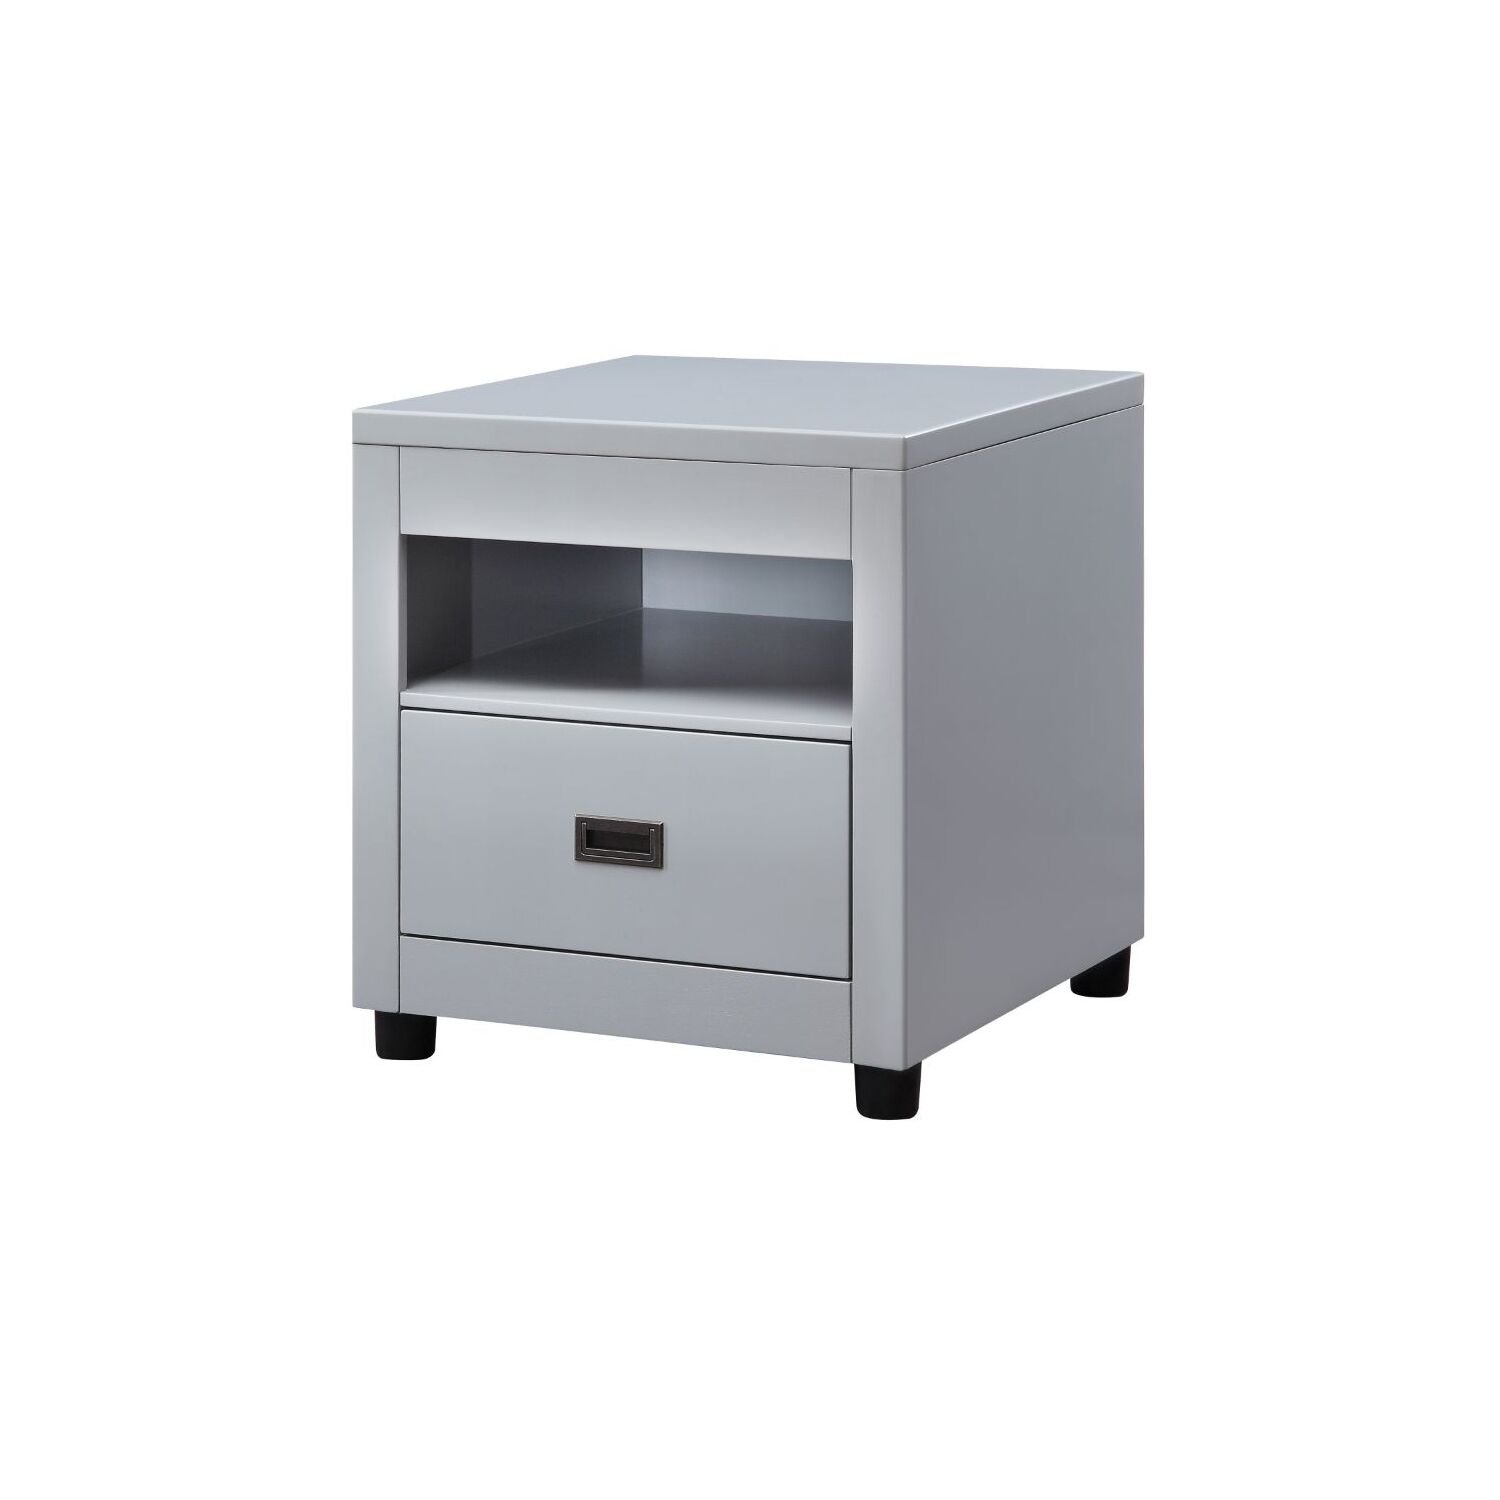 ACME Eleanor 1-Drawer Wooden End Table with Open Compartment in Dove Gray - image 1 of 2